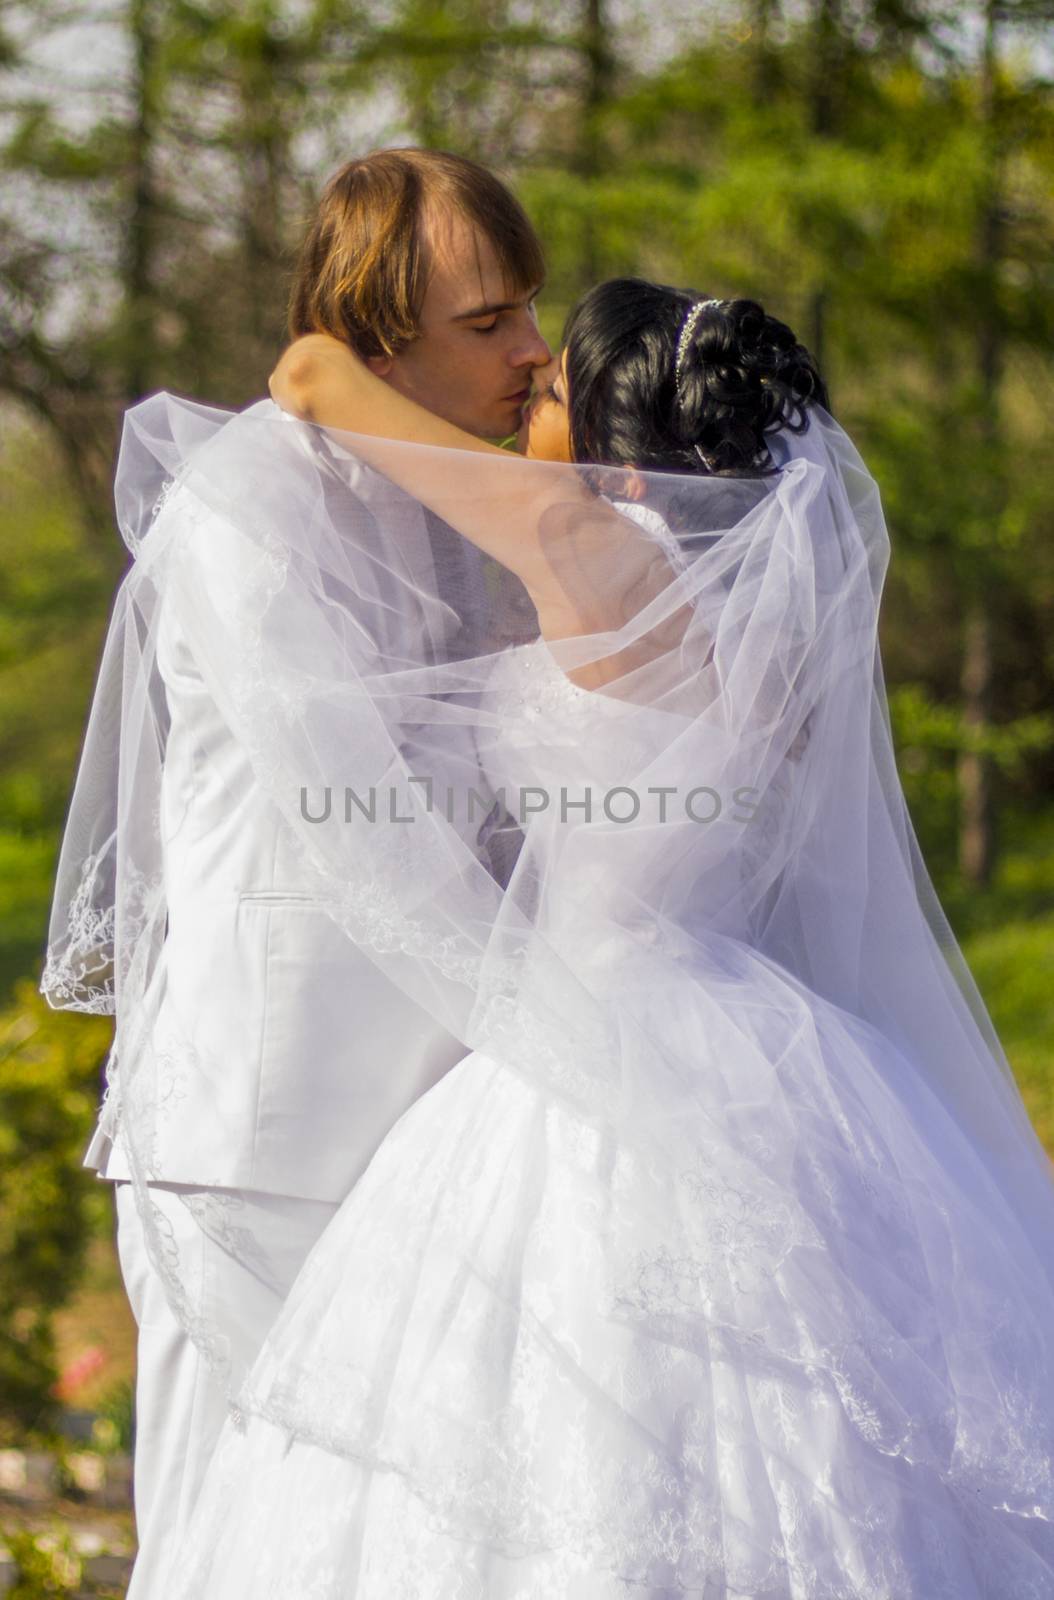 Bride and groom with a bouquet of kisses on the nature. For your commercial and editorial use.